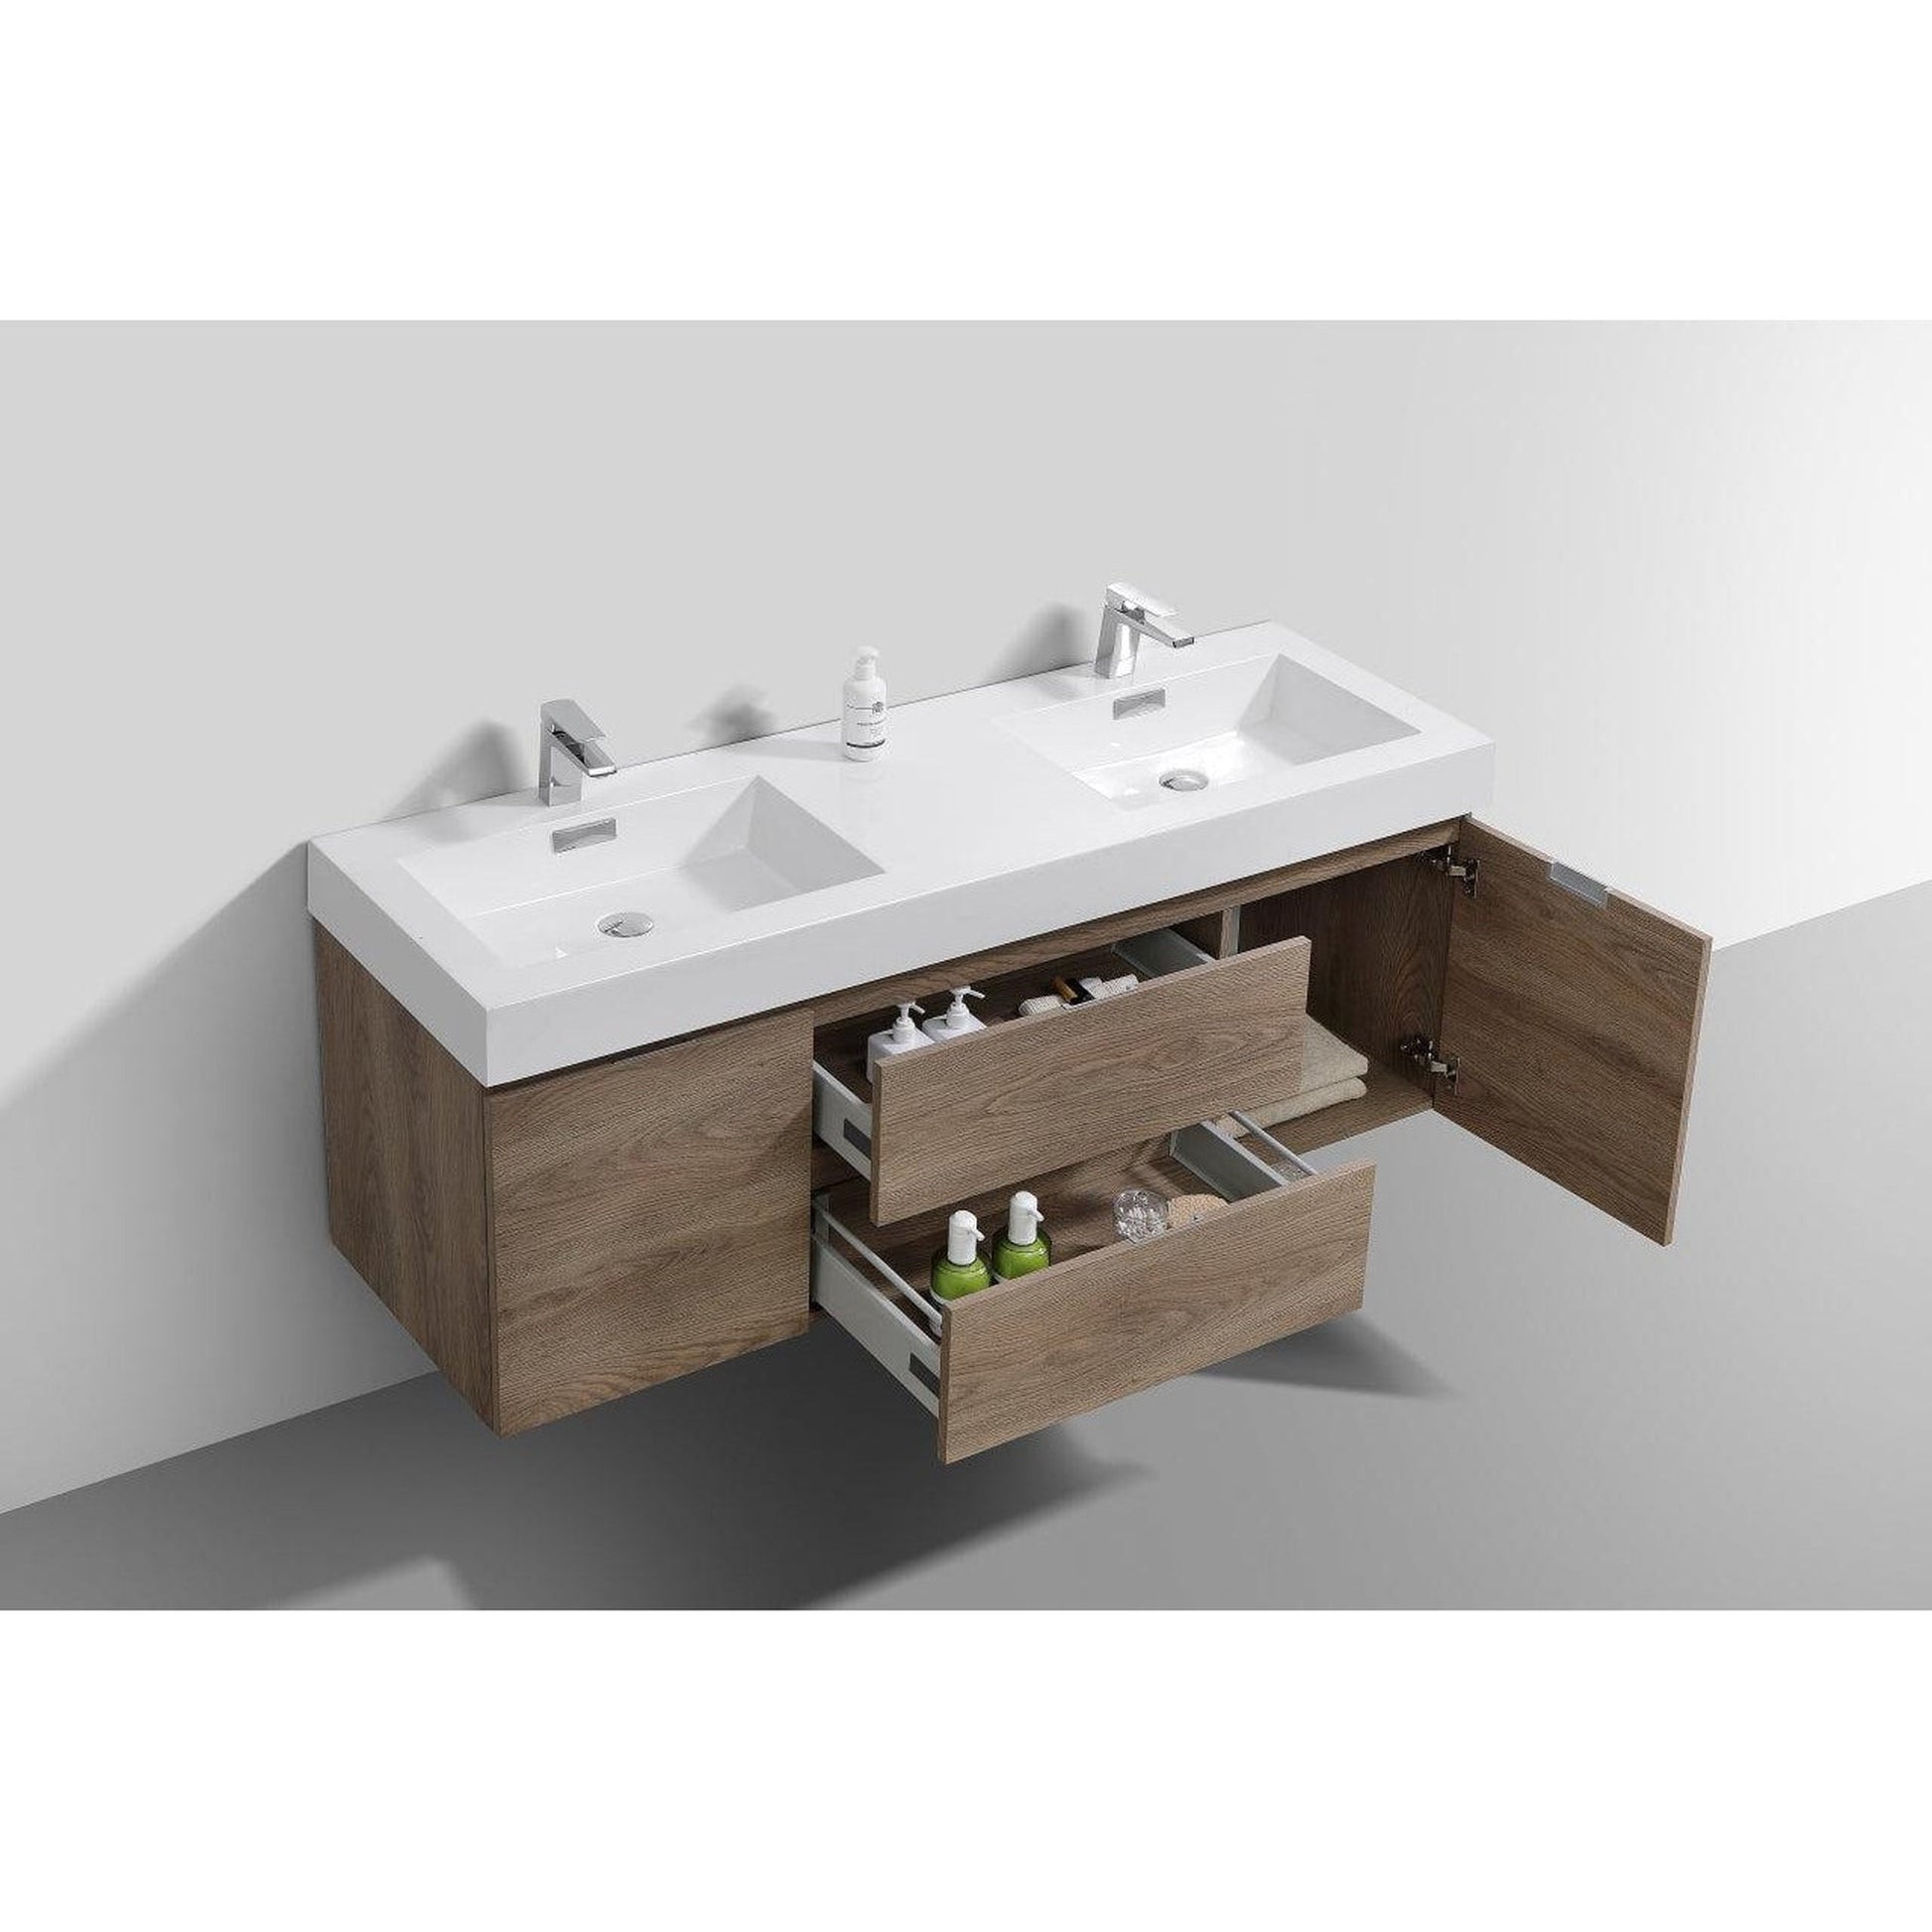 KubeBath Bliss 60" Butternut Wall-Mounted Modern Bathroom Vanity With Double Integrated Acrylic Sink With Overflow and 60" Butternut Framed Mirror With Shelf